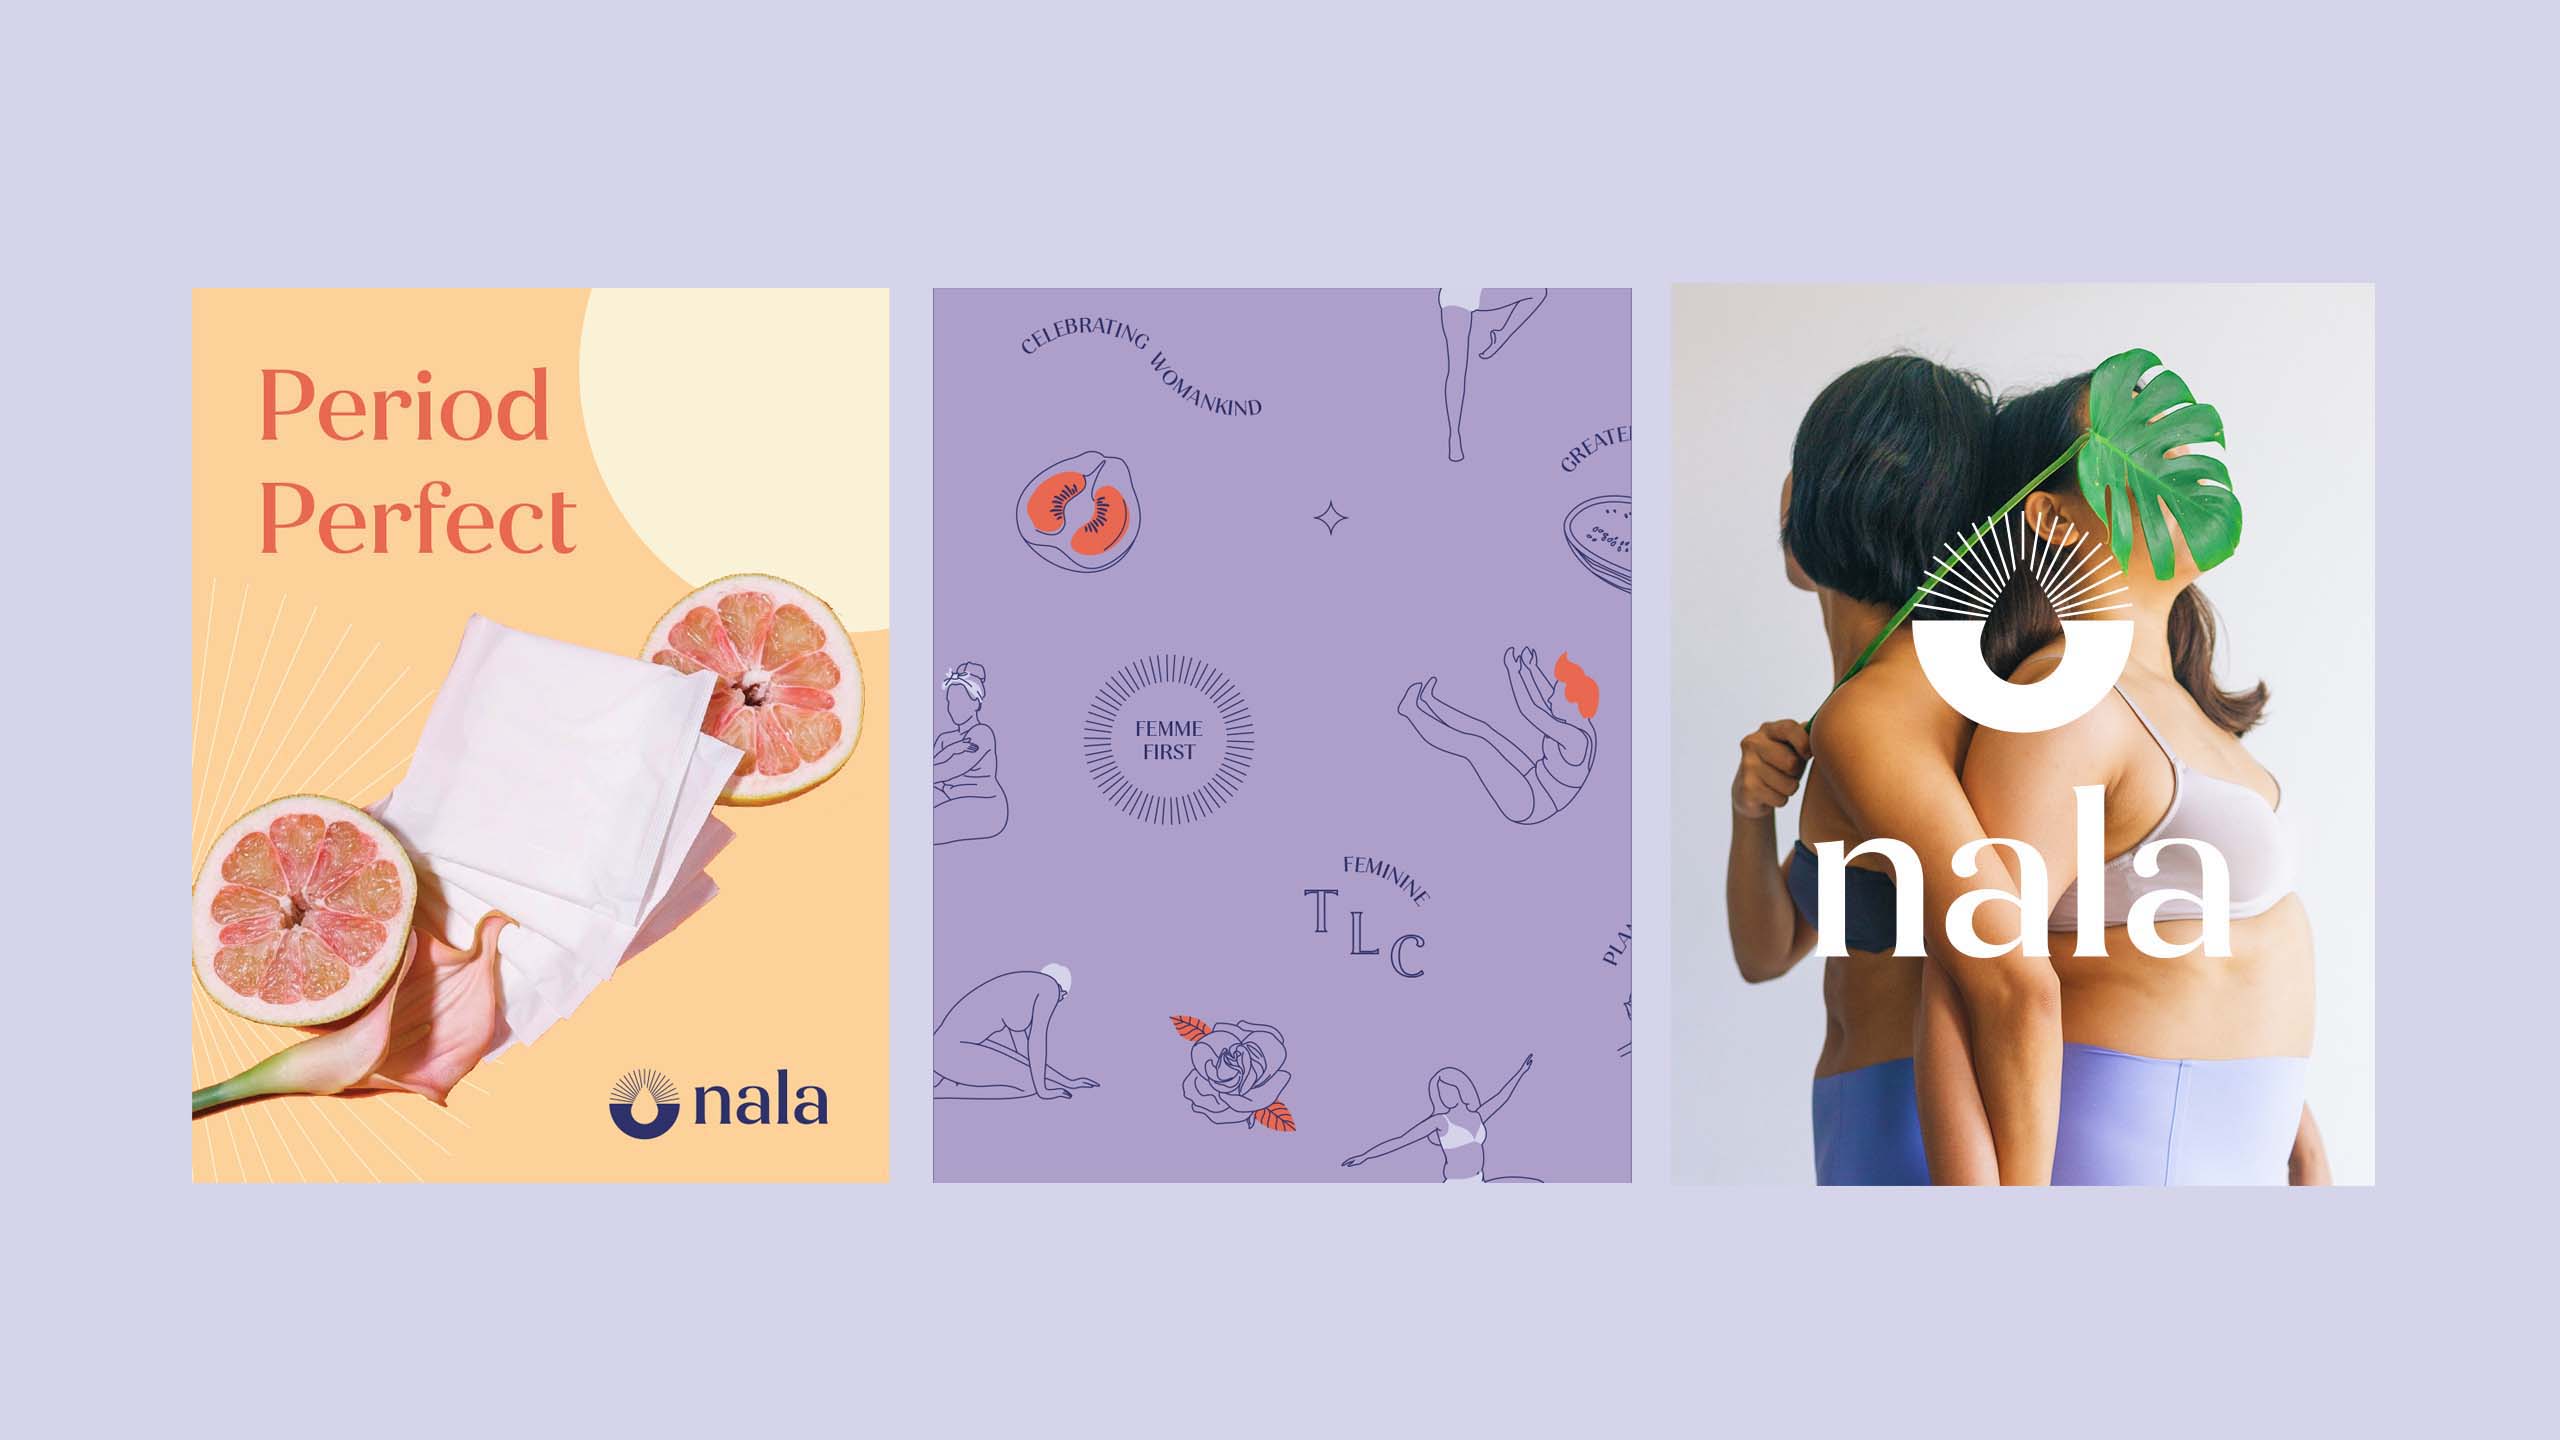 Brand photography and patterns designed for femtech brand Nala